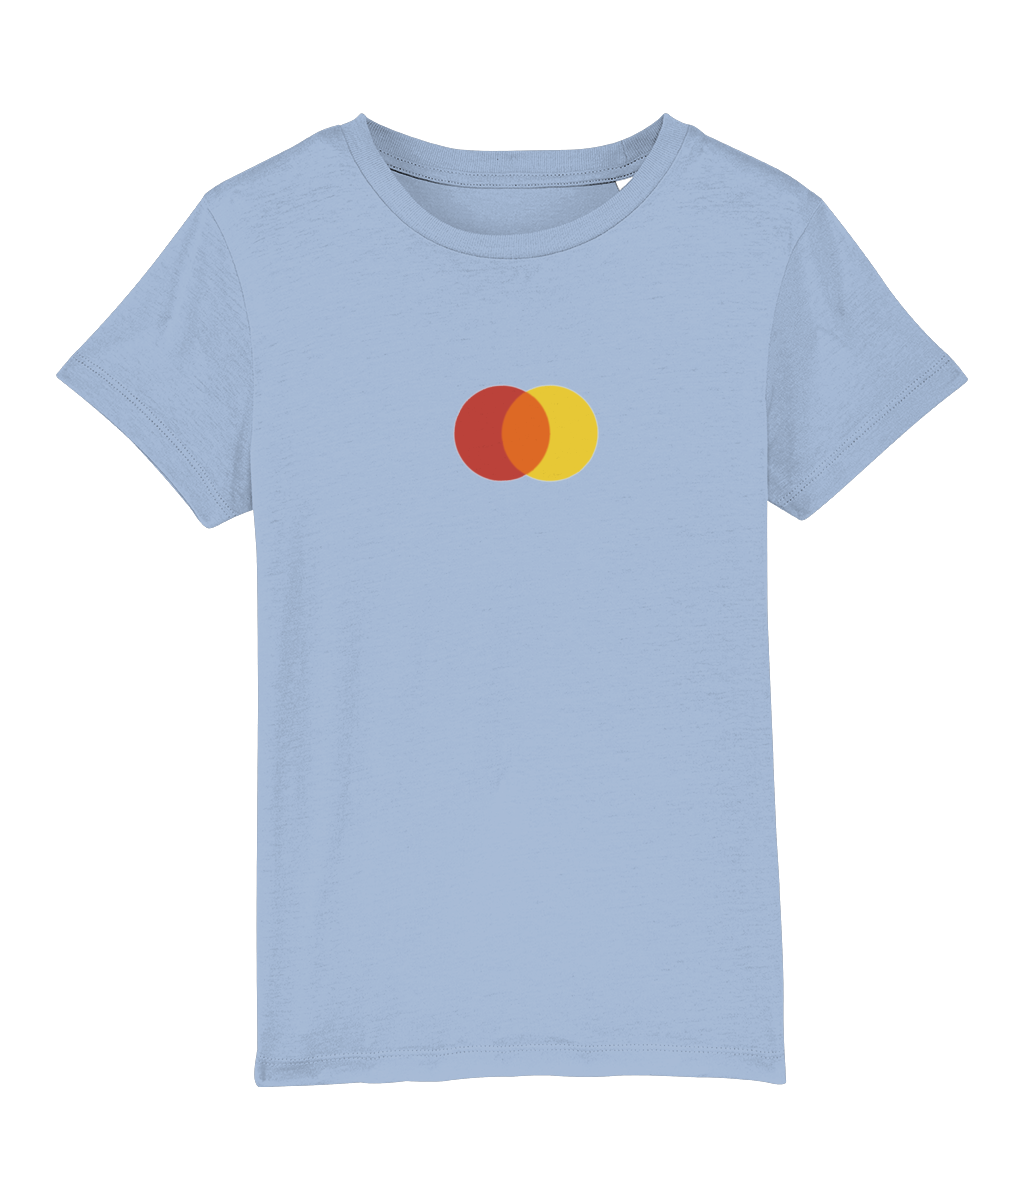 Red Yellow Makes Orange Organic Cotton T Shirt - Buy any 3 get 10% off